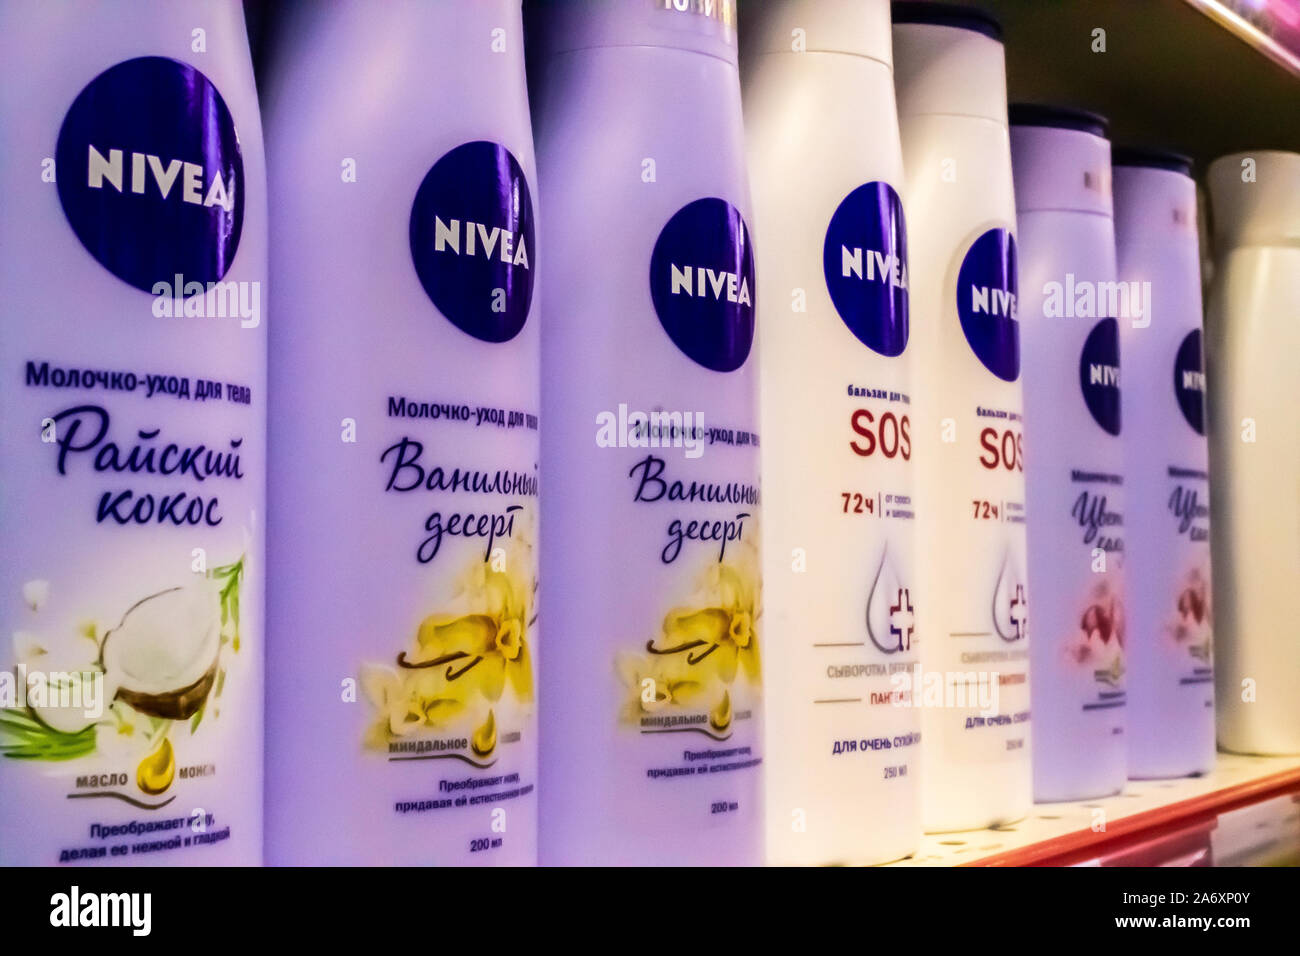 Nivea cosmetic products for sale a supermarket The Nivea brand for skin and body care belongs to the German company Stock Photo - Alamy